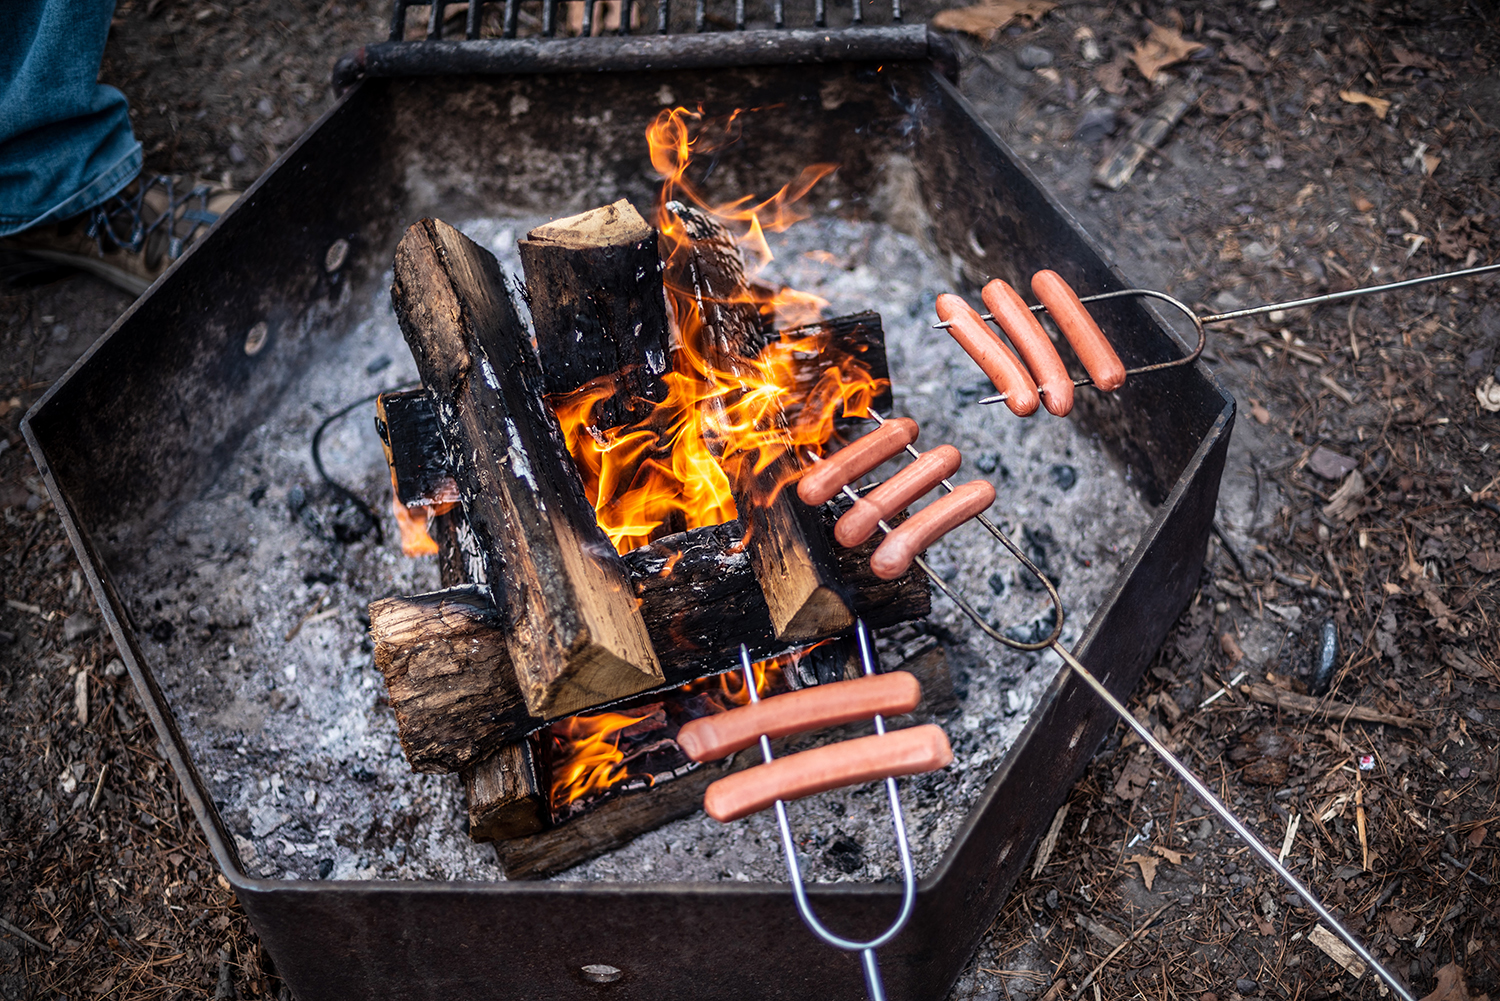 hot dogs over the fire copy - The Camp Site - Your Camping Resource